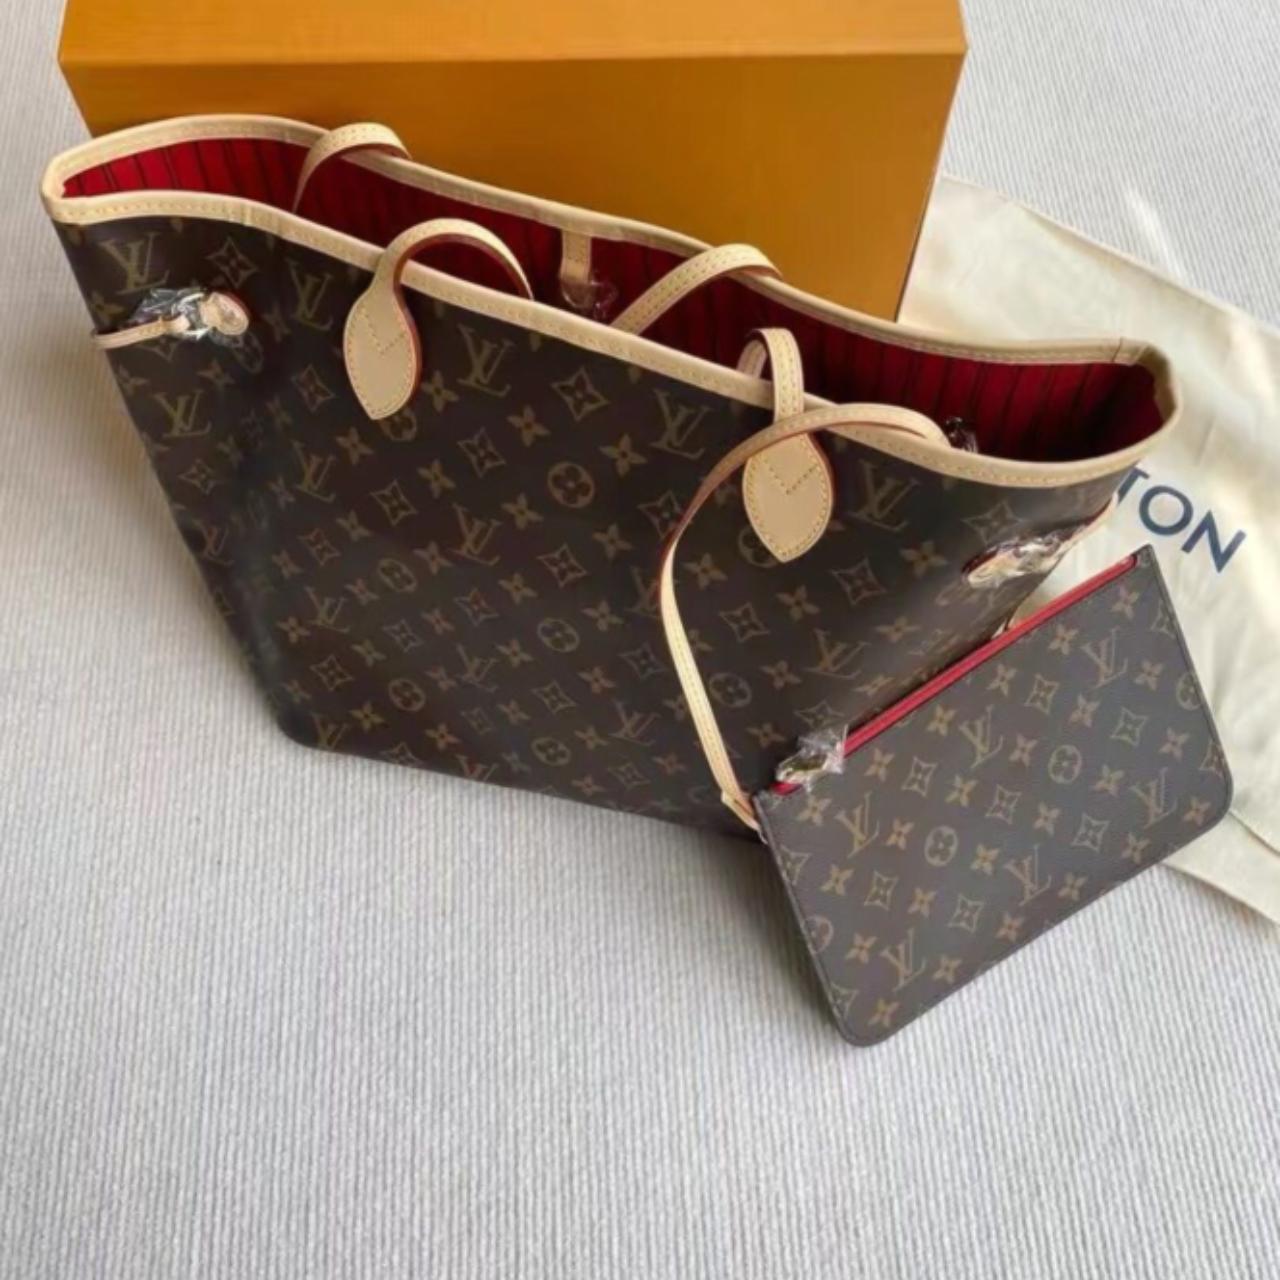 Louis Vuitton Neverfull MM Bag in Monogram with Cherry Red